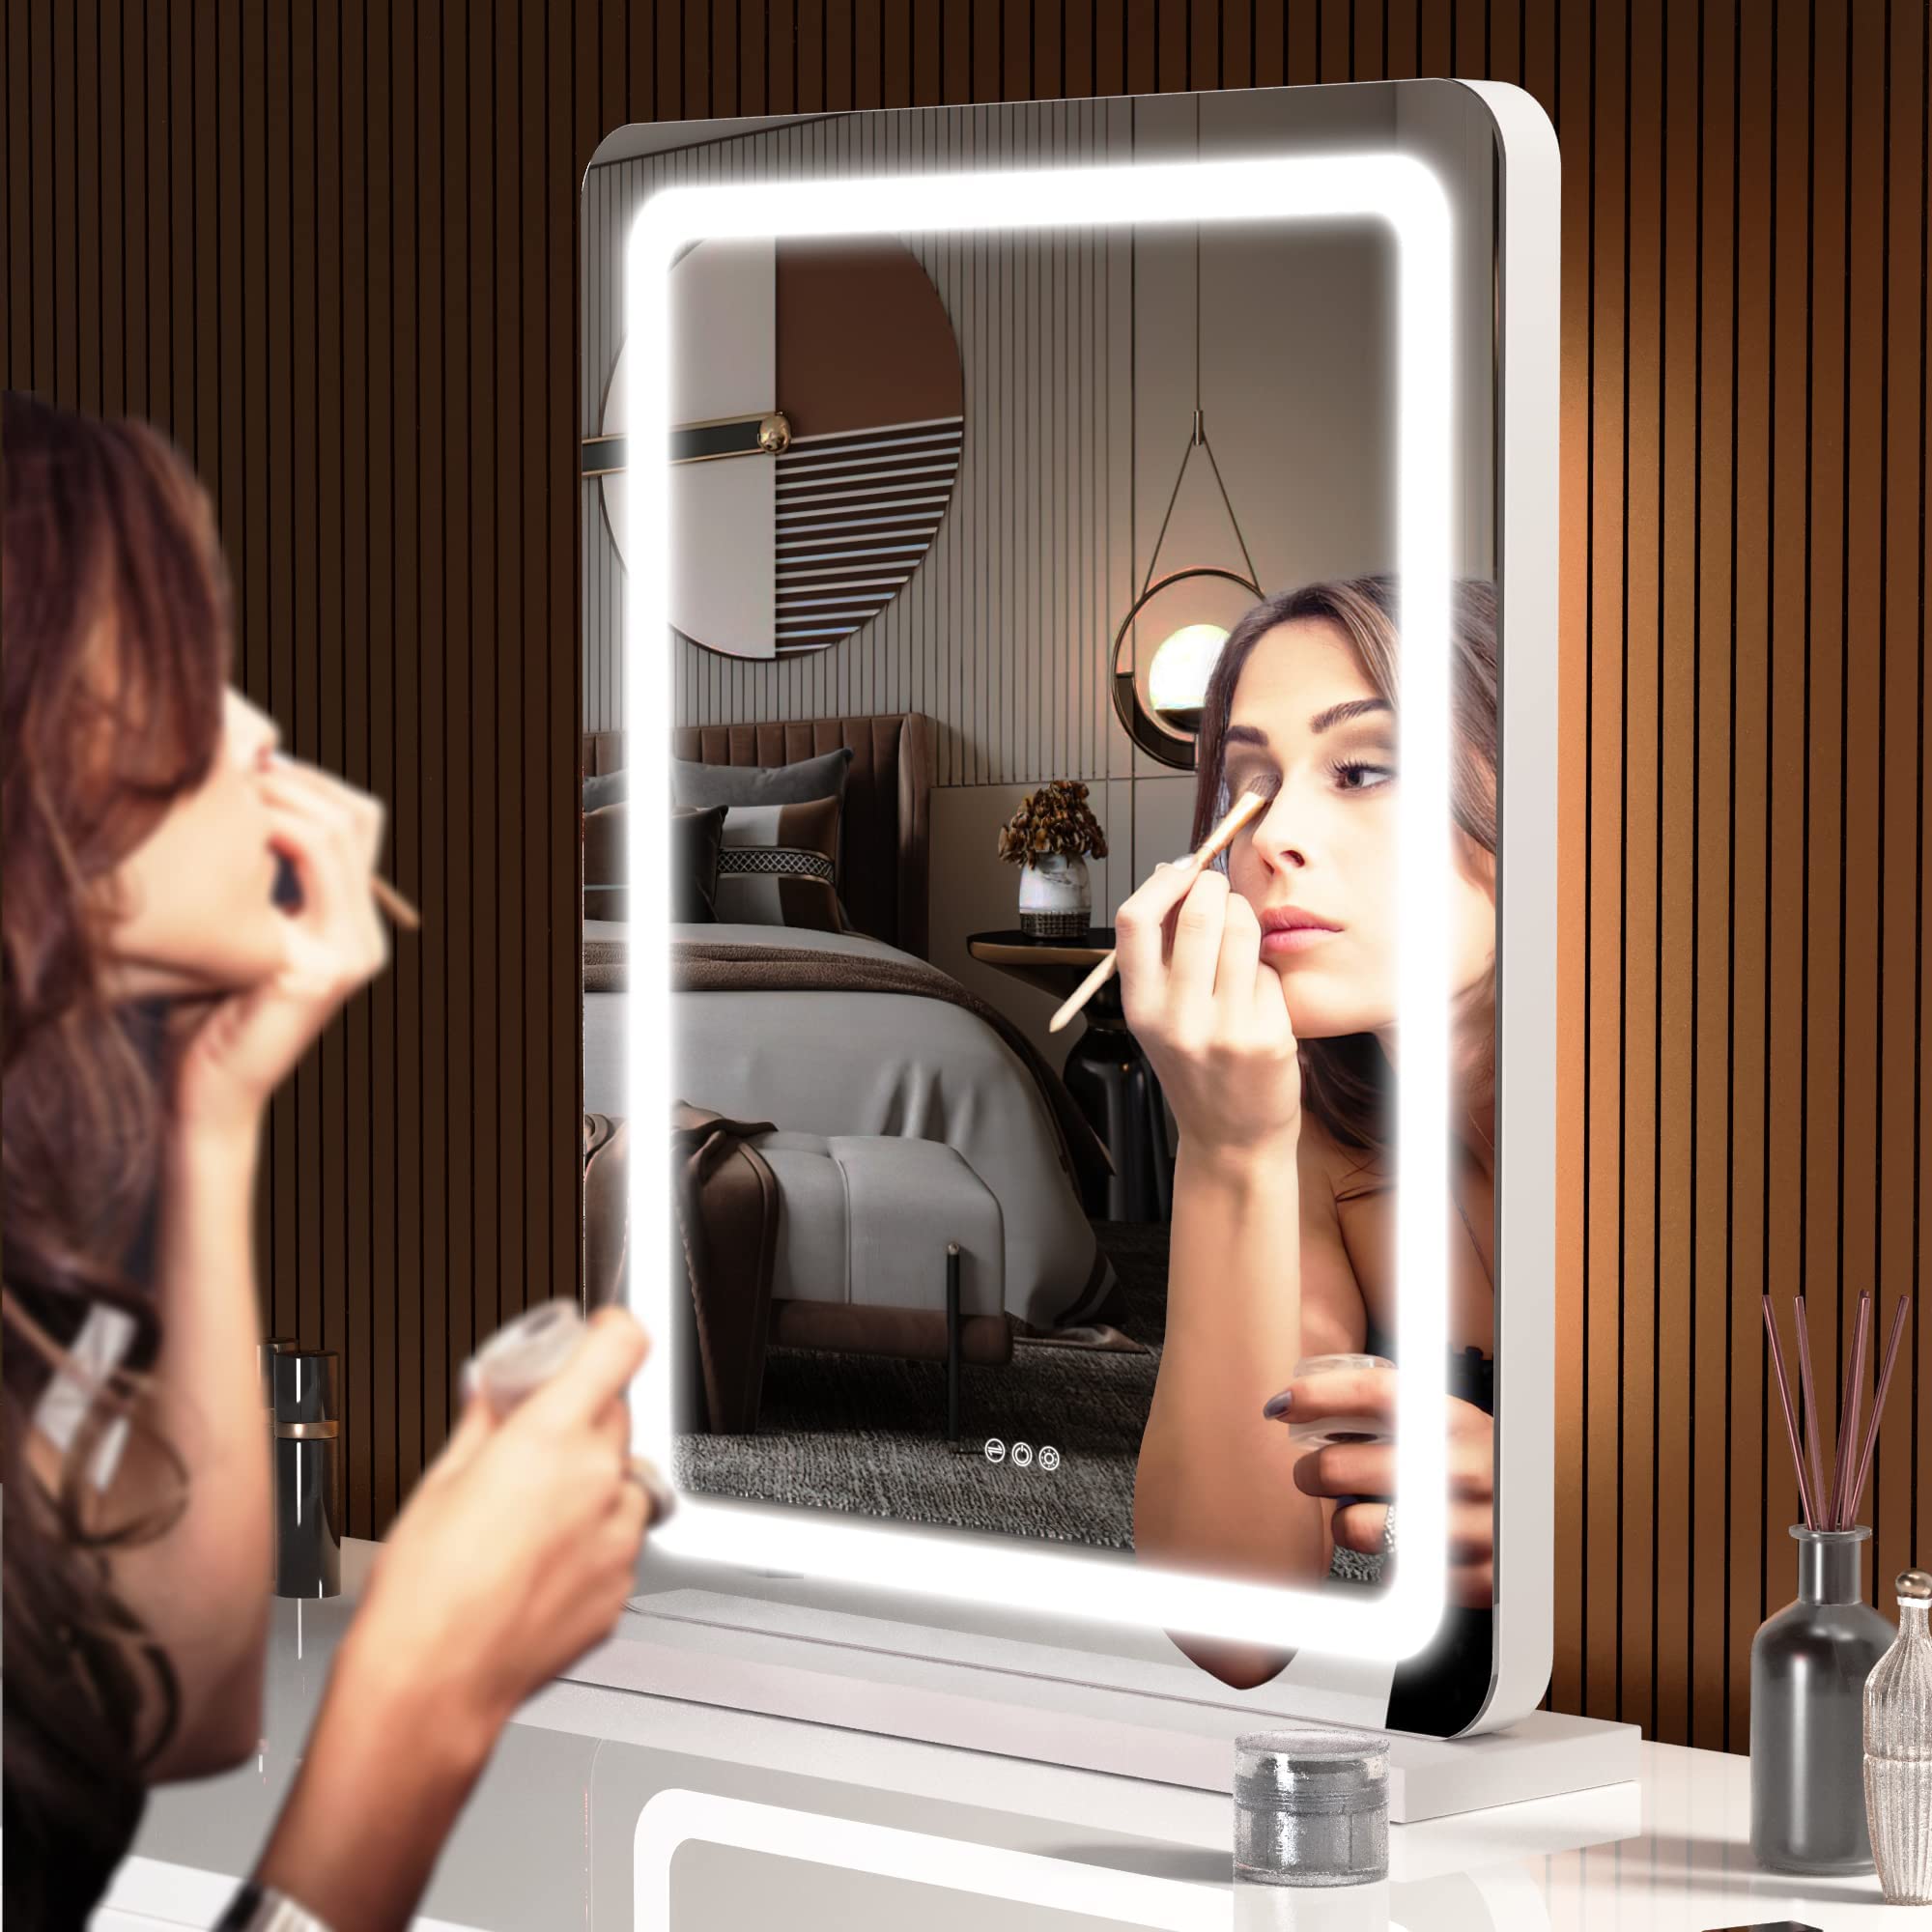 Should the Vanity Mirror be Larger than the Vanity?